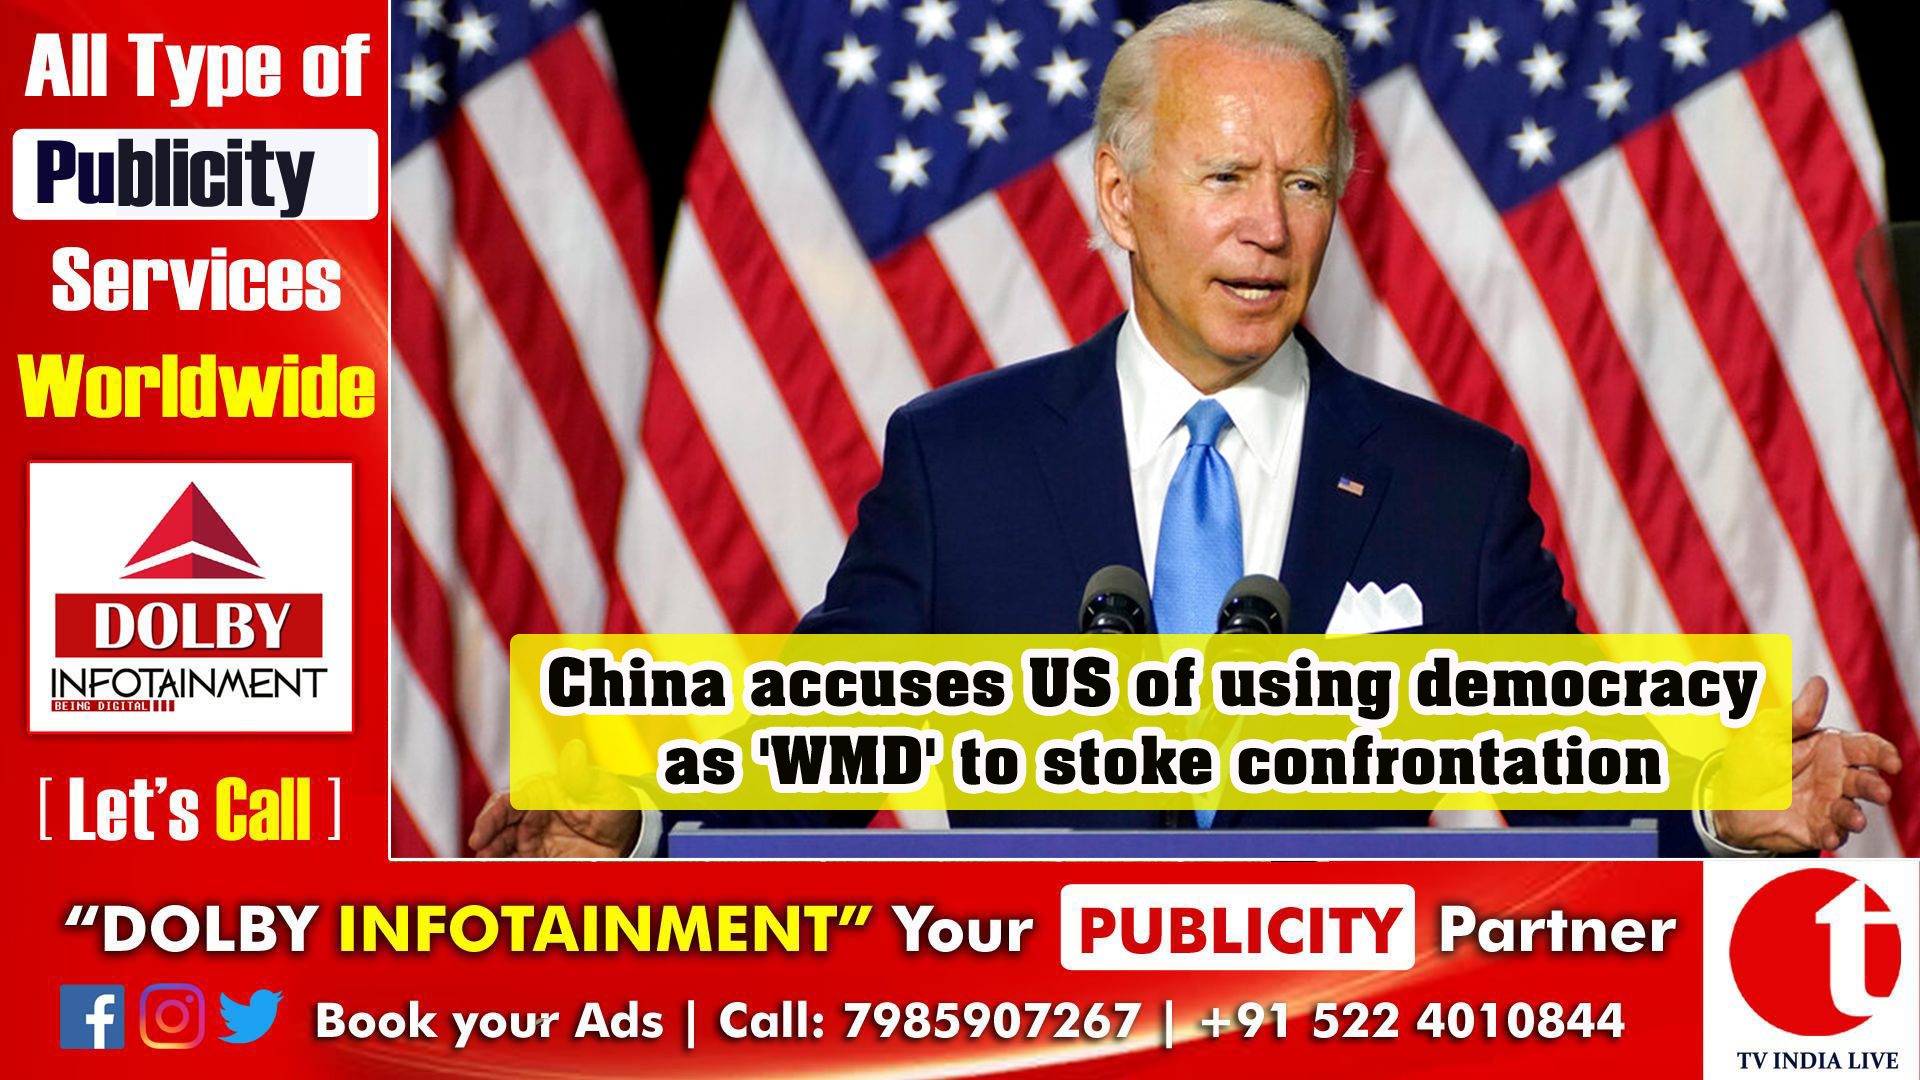 China accuses US of using democracy as 'WMD' to stoke confrontation